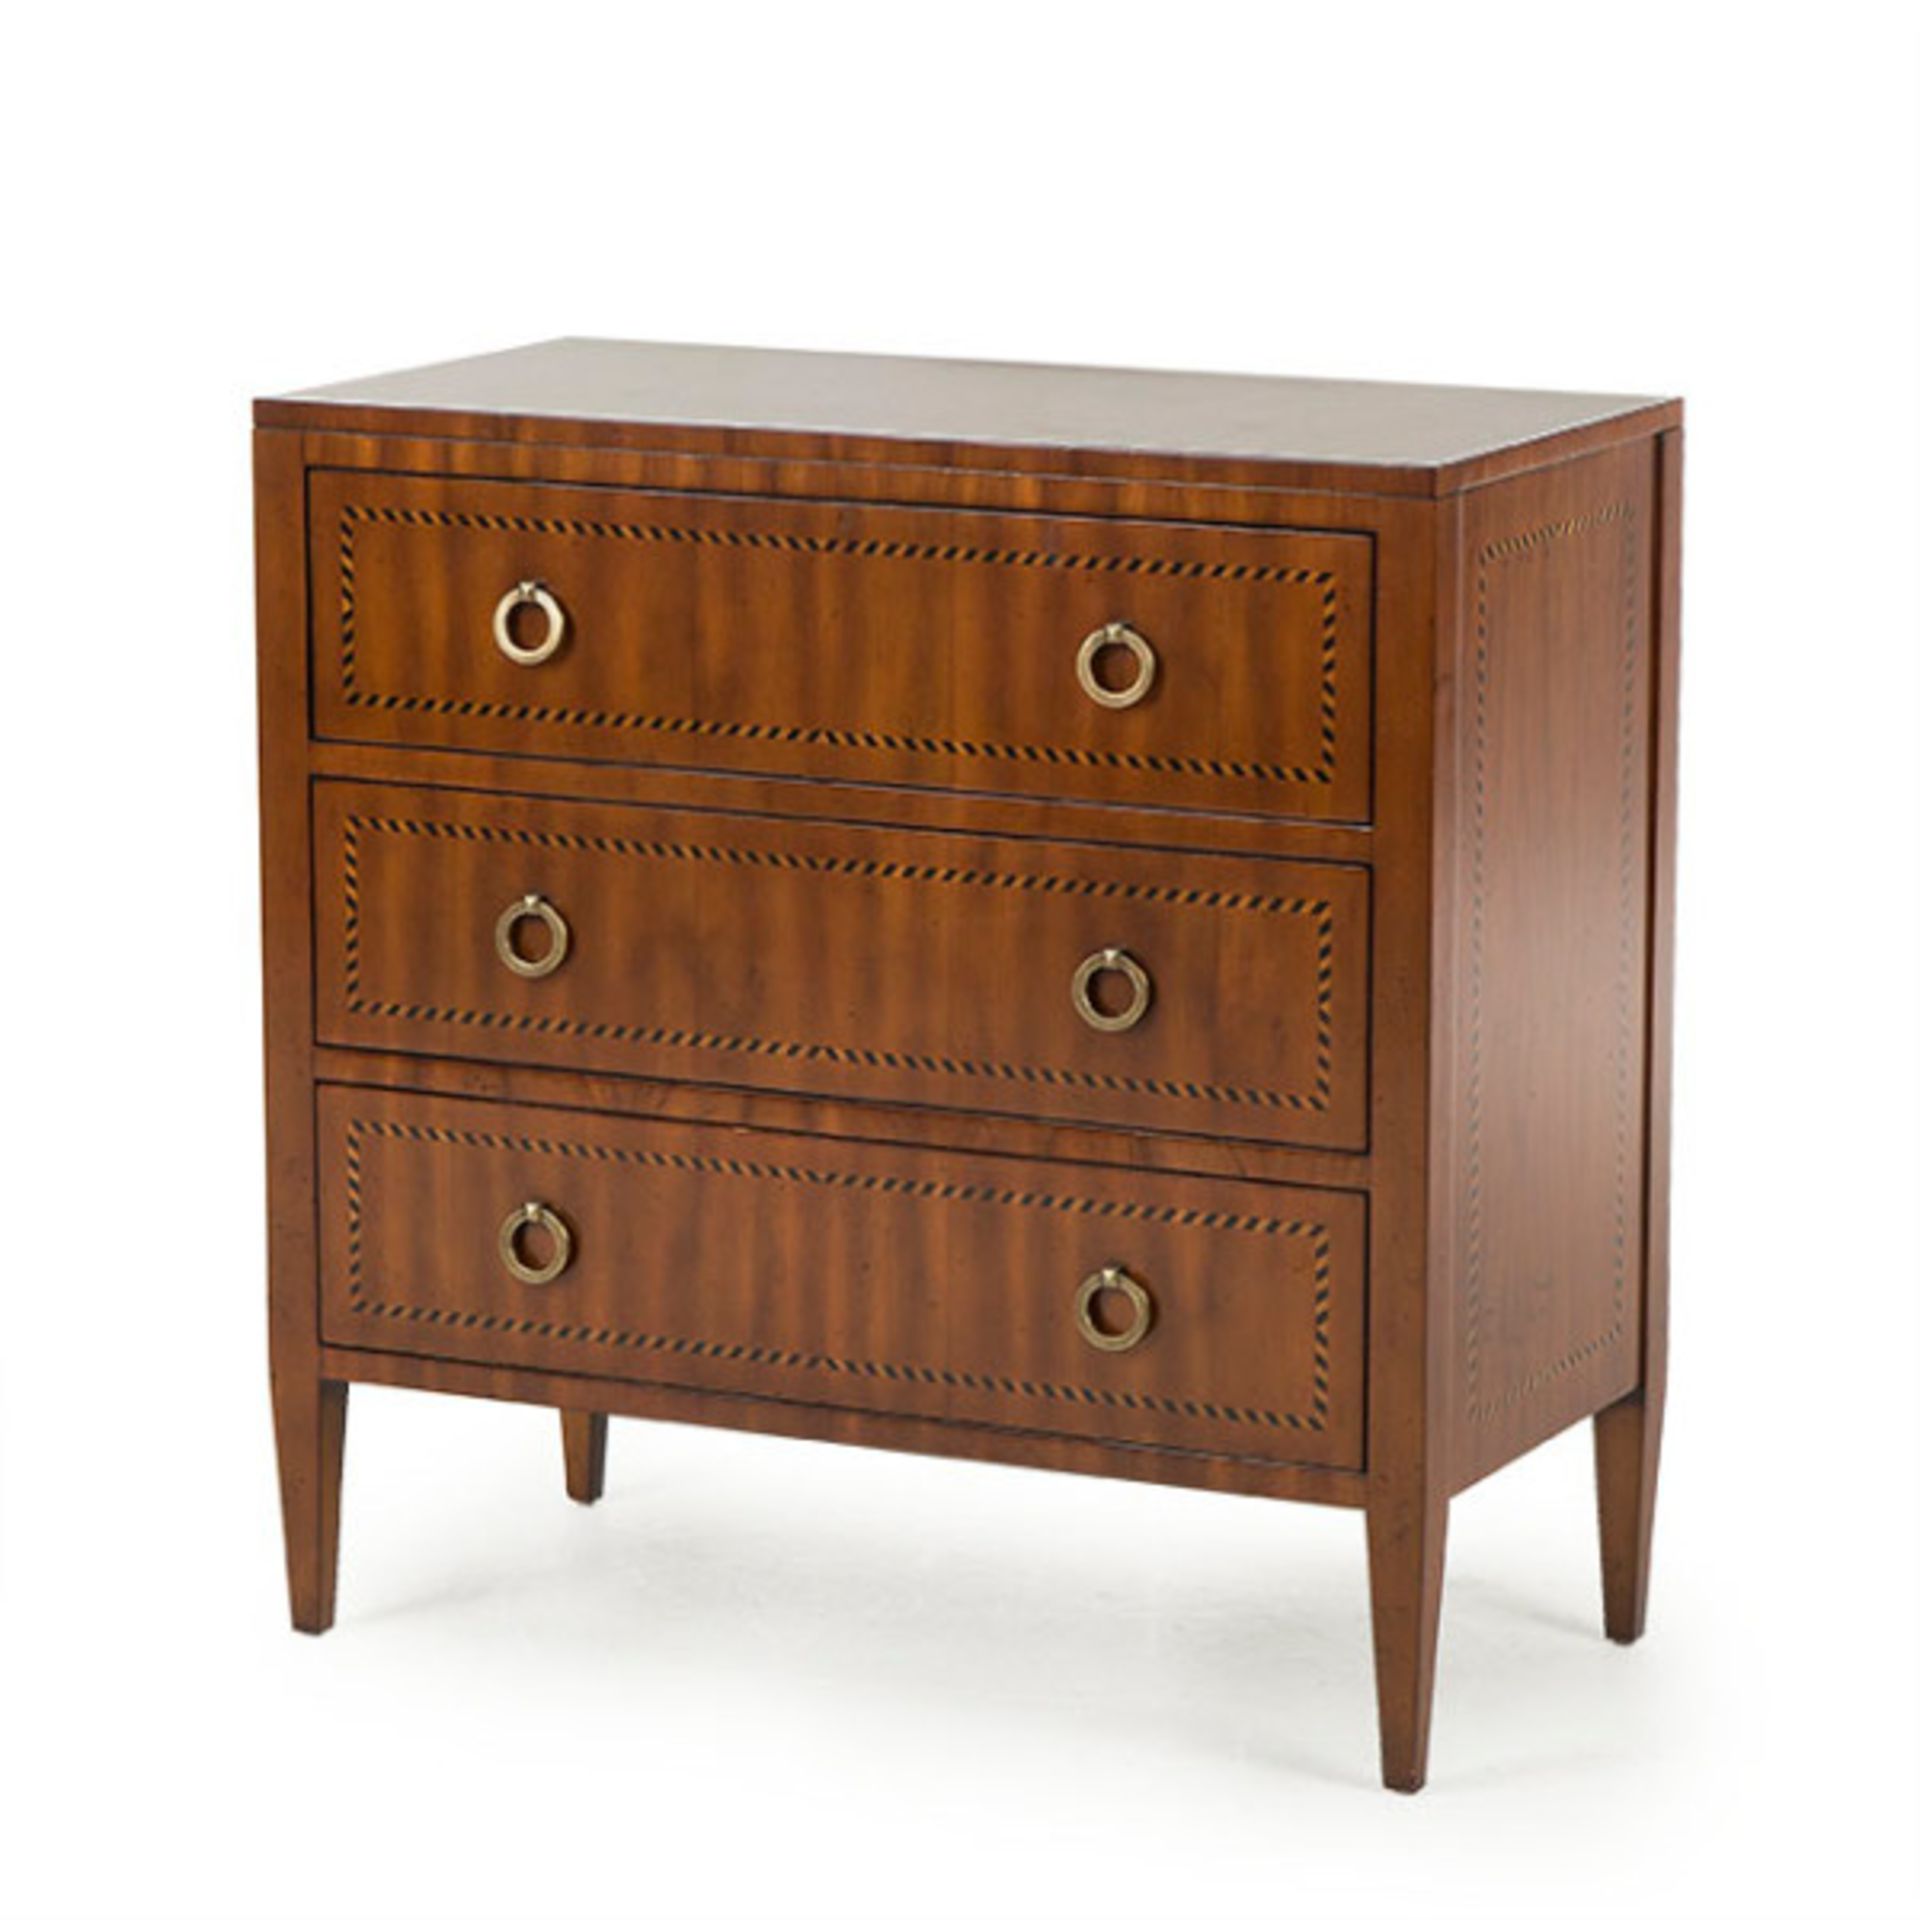 Maison 55 French 3 Drawer Chest On Legs carton French chest would make a wonderful decorative